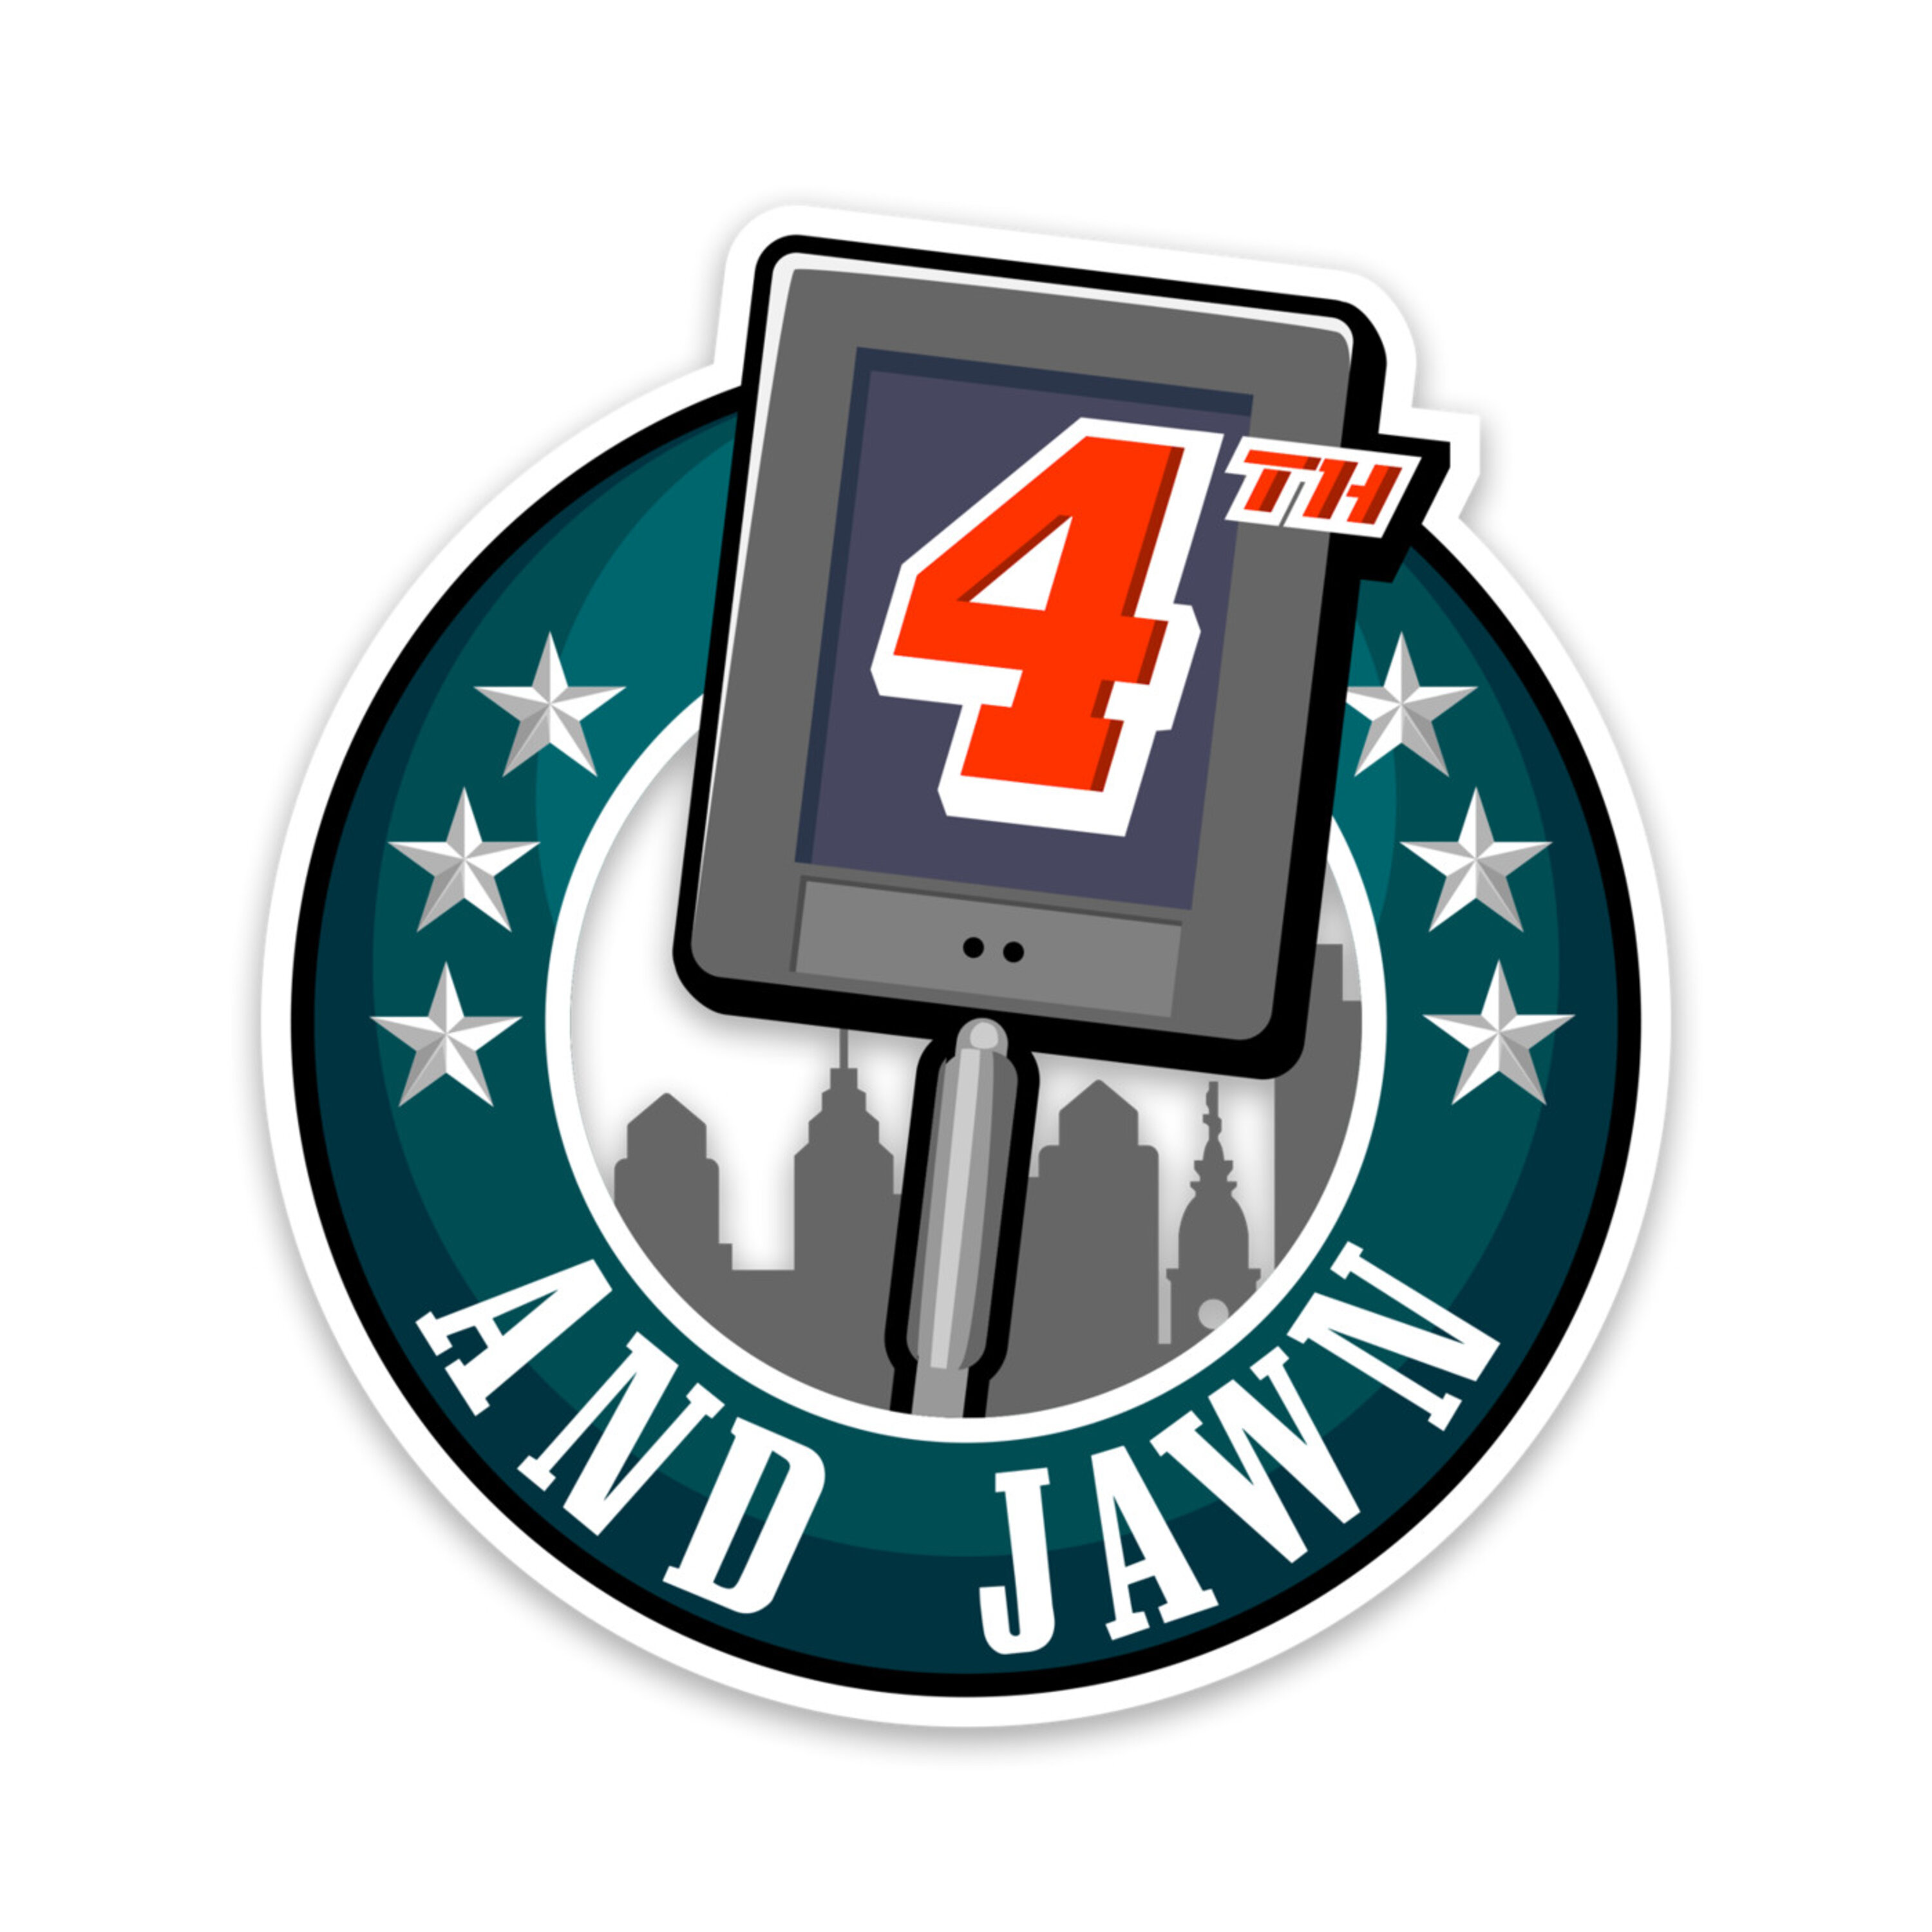 4th and Jawn - Episode 221 - Eagles/Steelers Recap